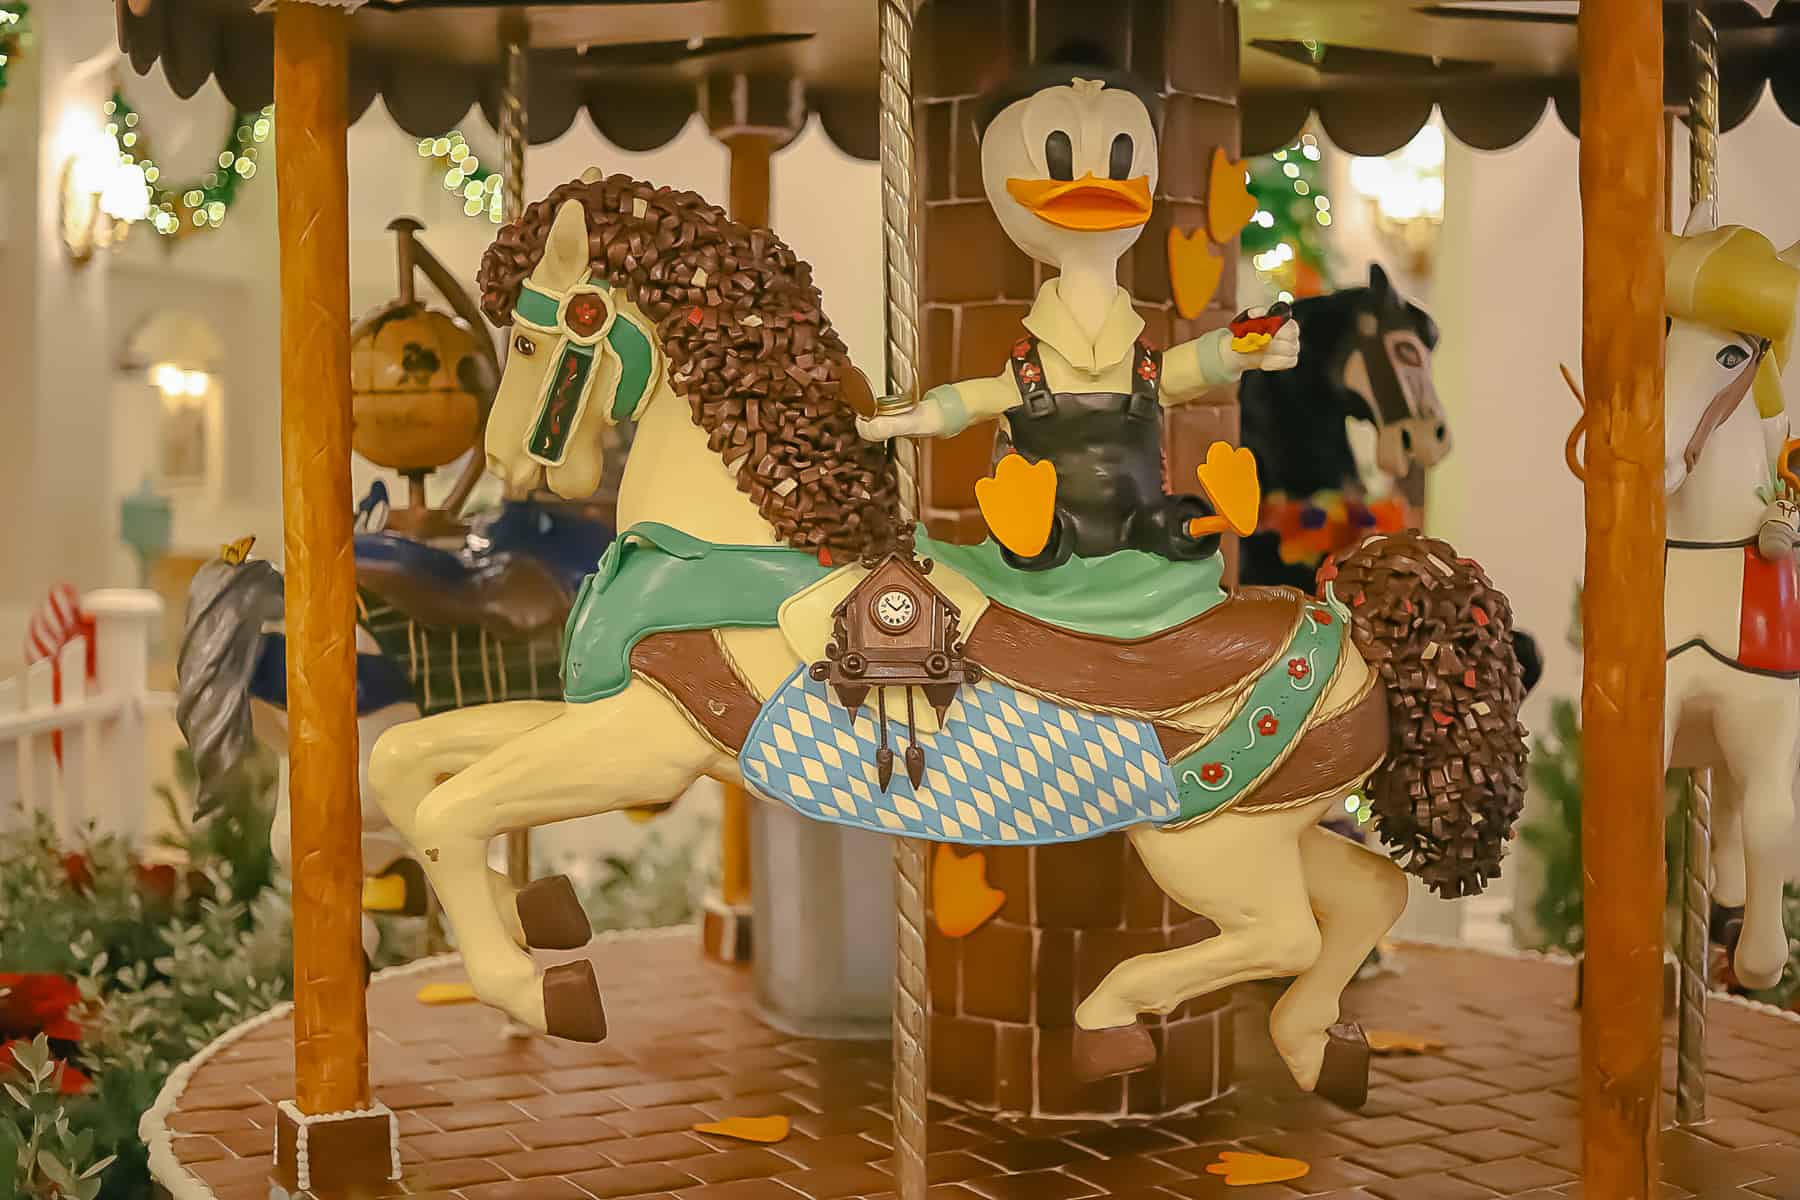 A carousel pony who has chocolate ribbons for its mane and tail. 